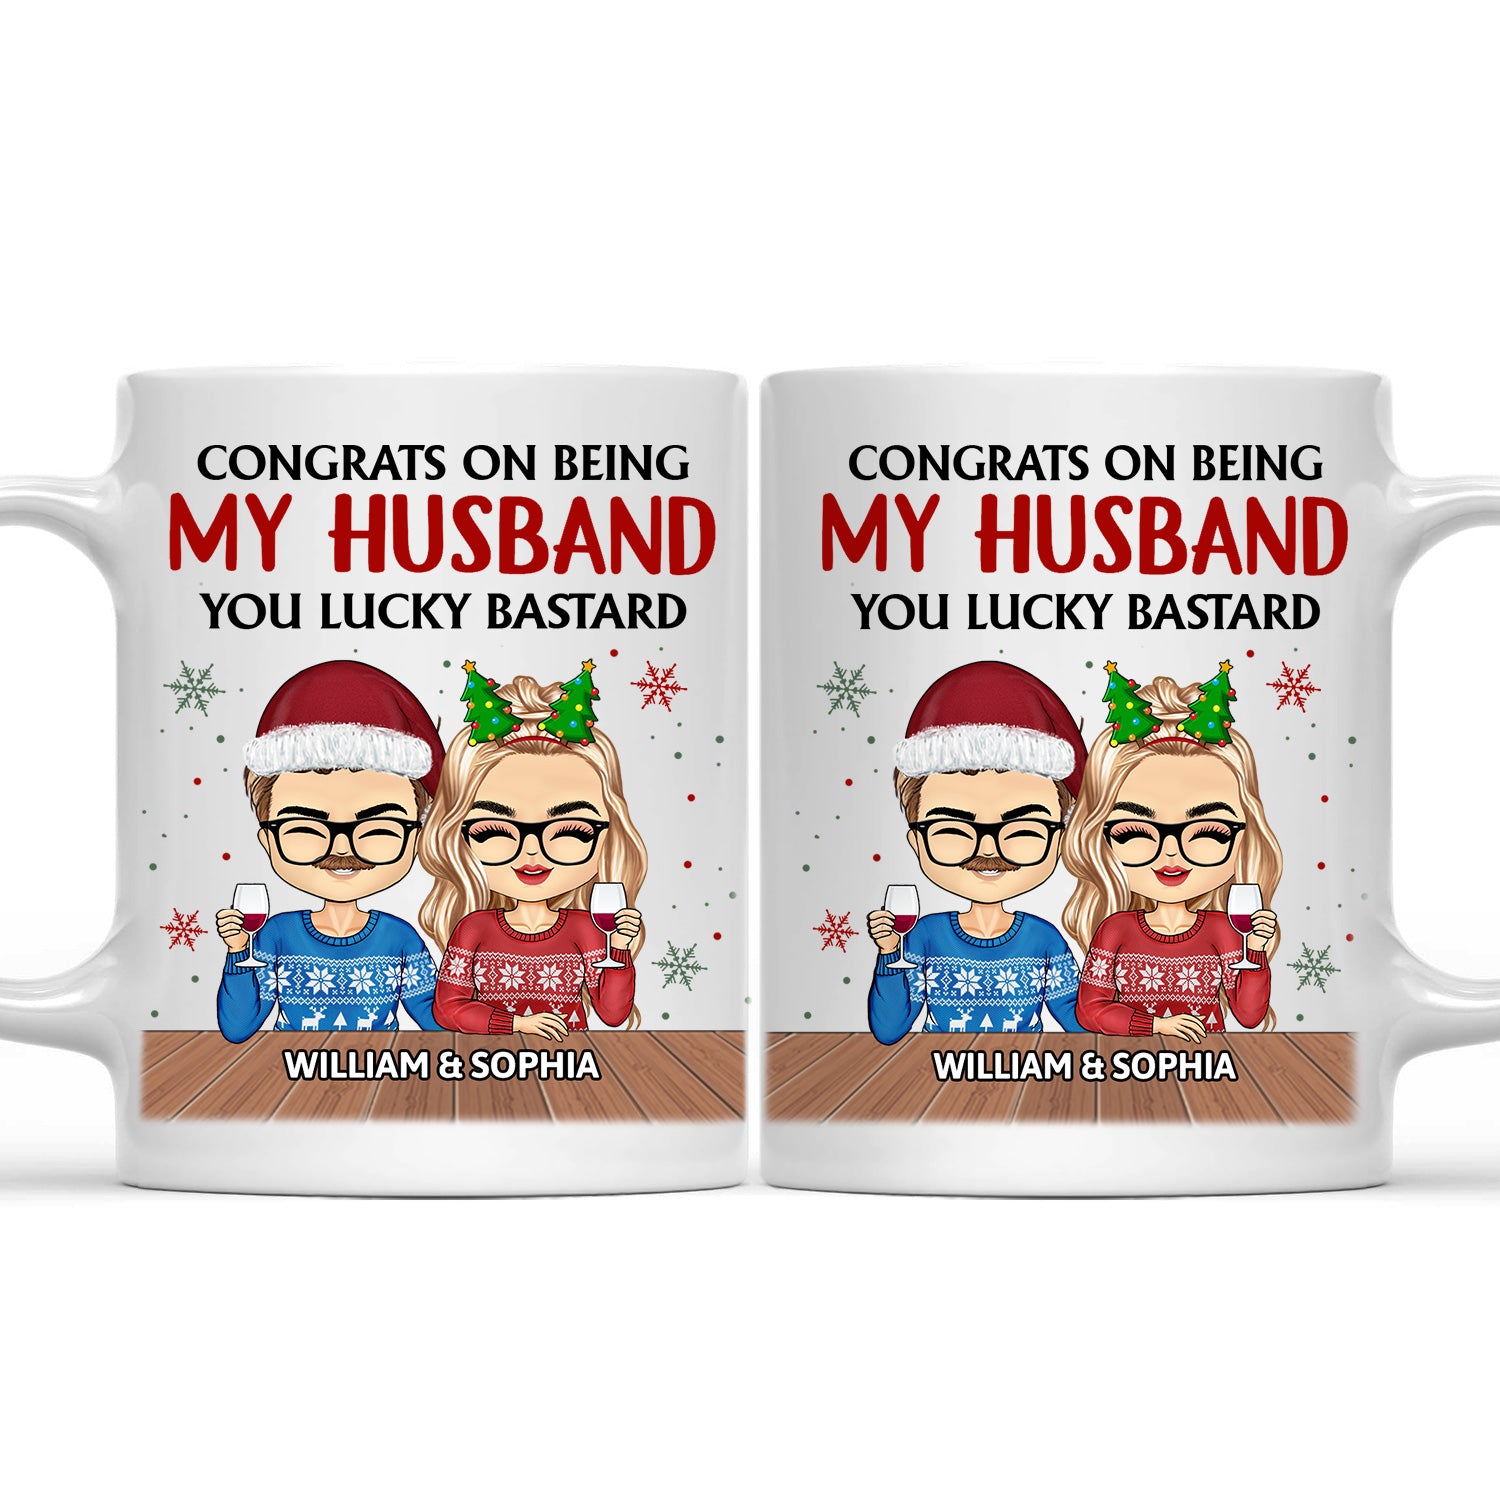 Congrats On Being My Husband Chibi - Christmas Gift For Couples, Family - Personalized Mug